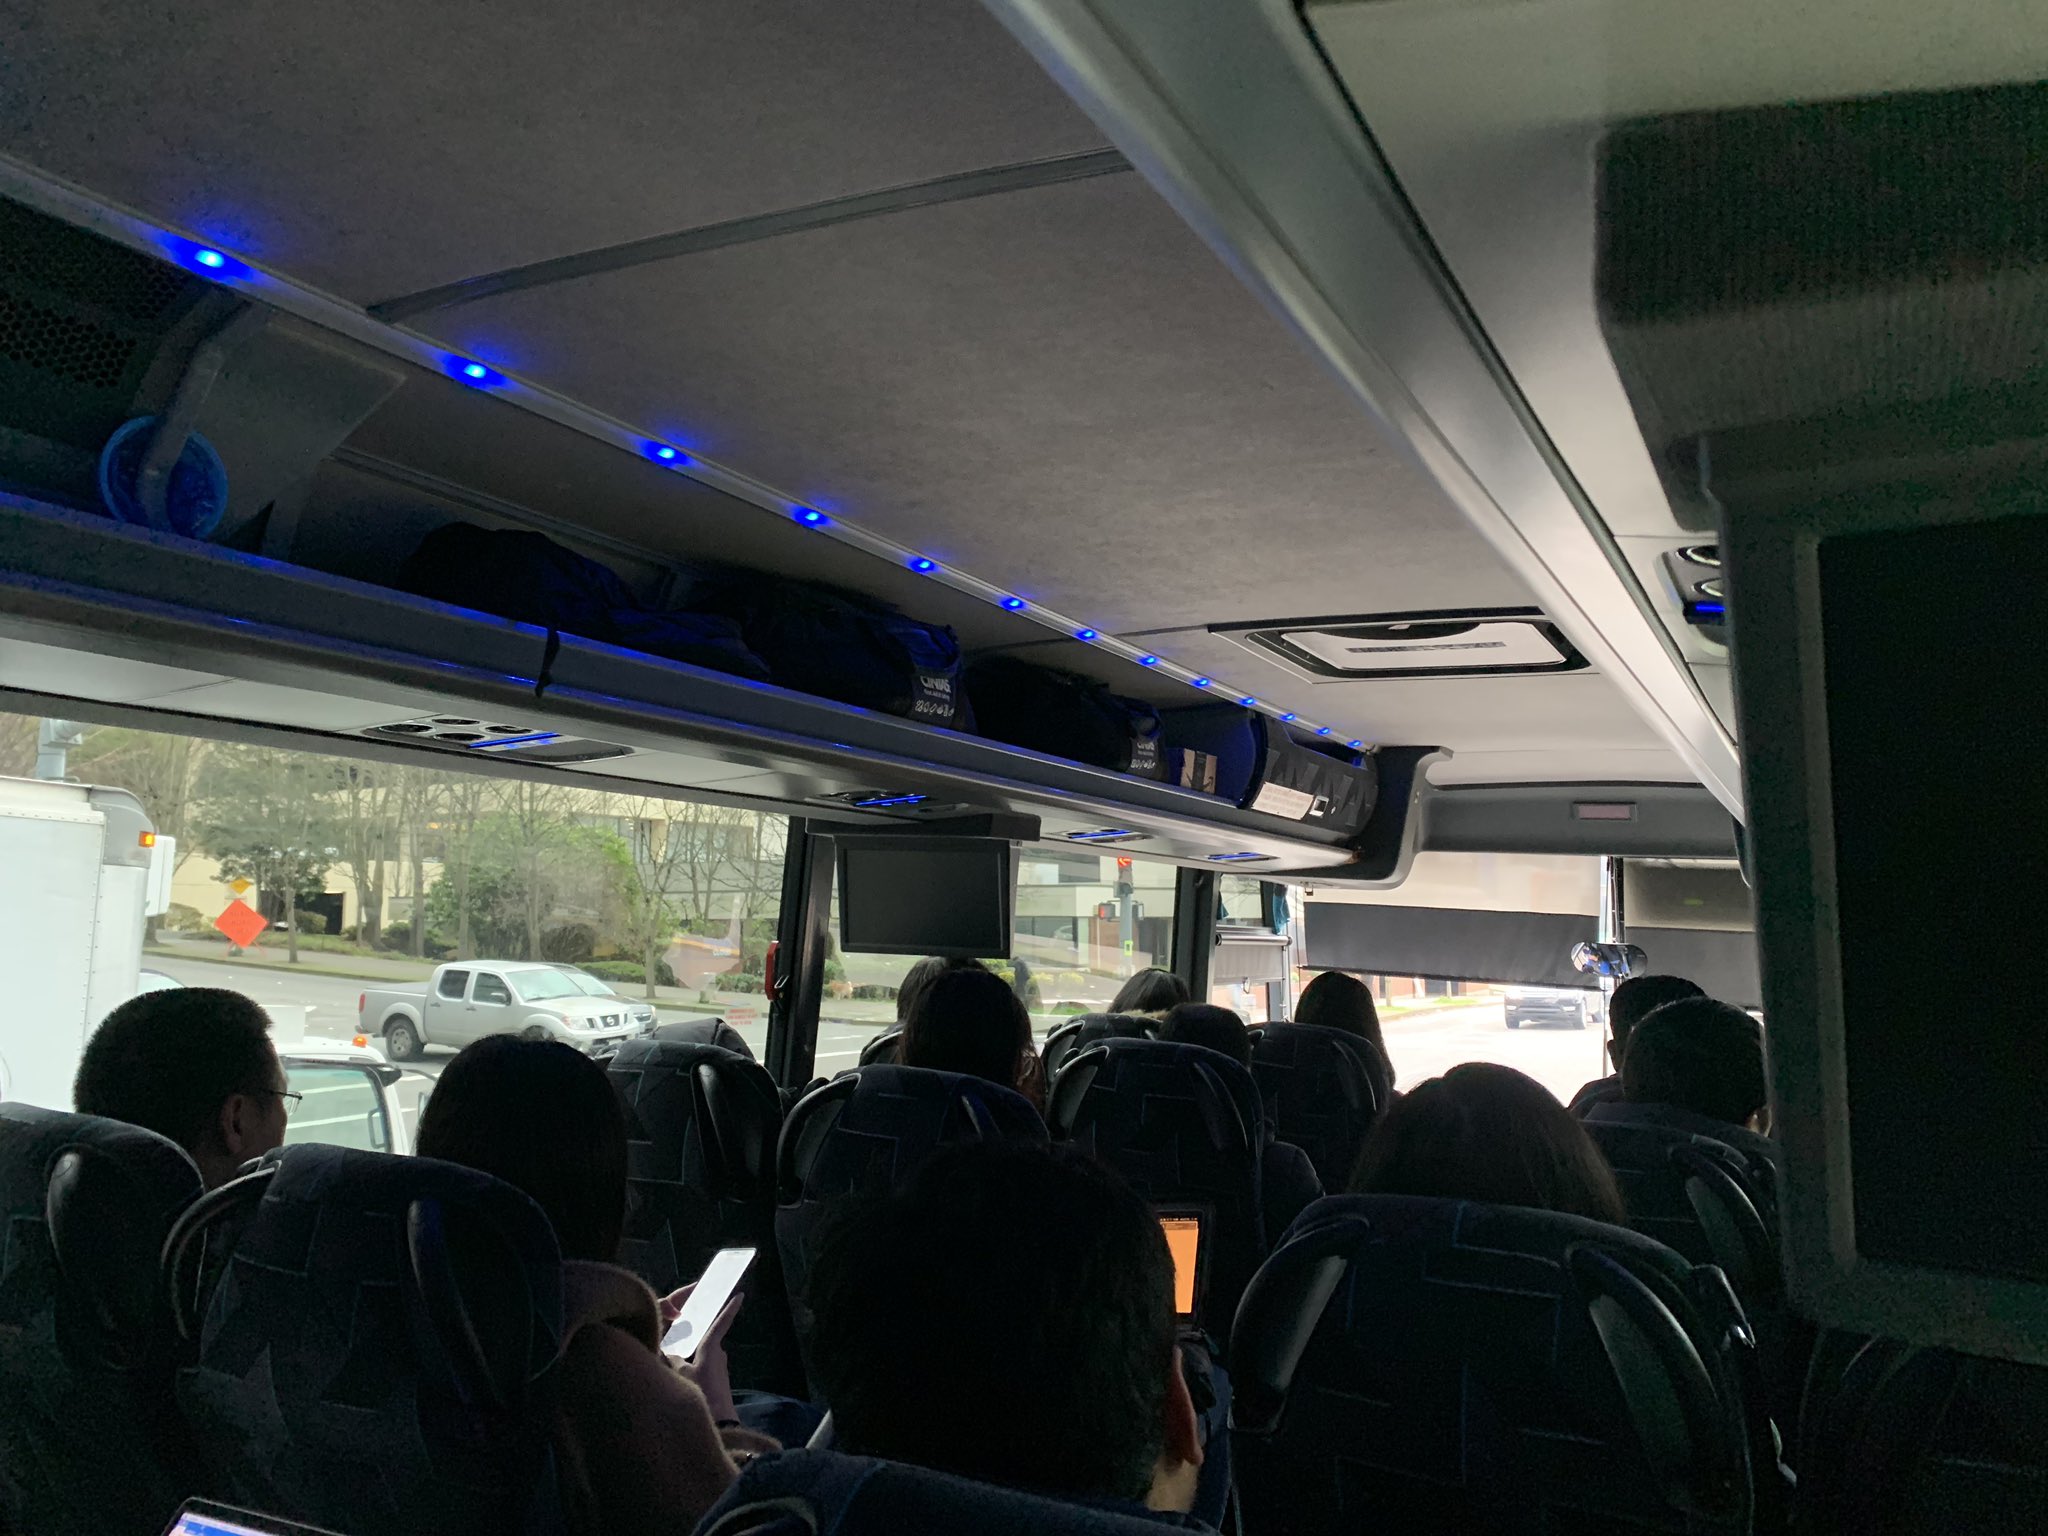 bow solely cylinder Jared Axelrod on Twitter: "Taking a full Amazon Ride shuttle from Bellevue  to Seattle. Every seat is taken by an employee that may otherwise be  driving a SOV. One of the many